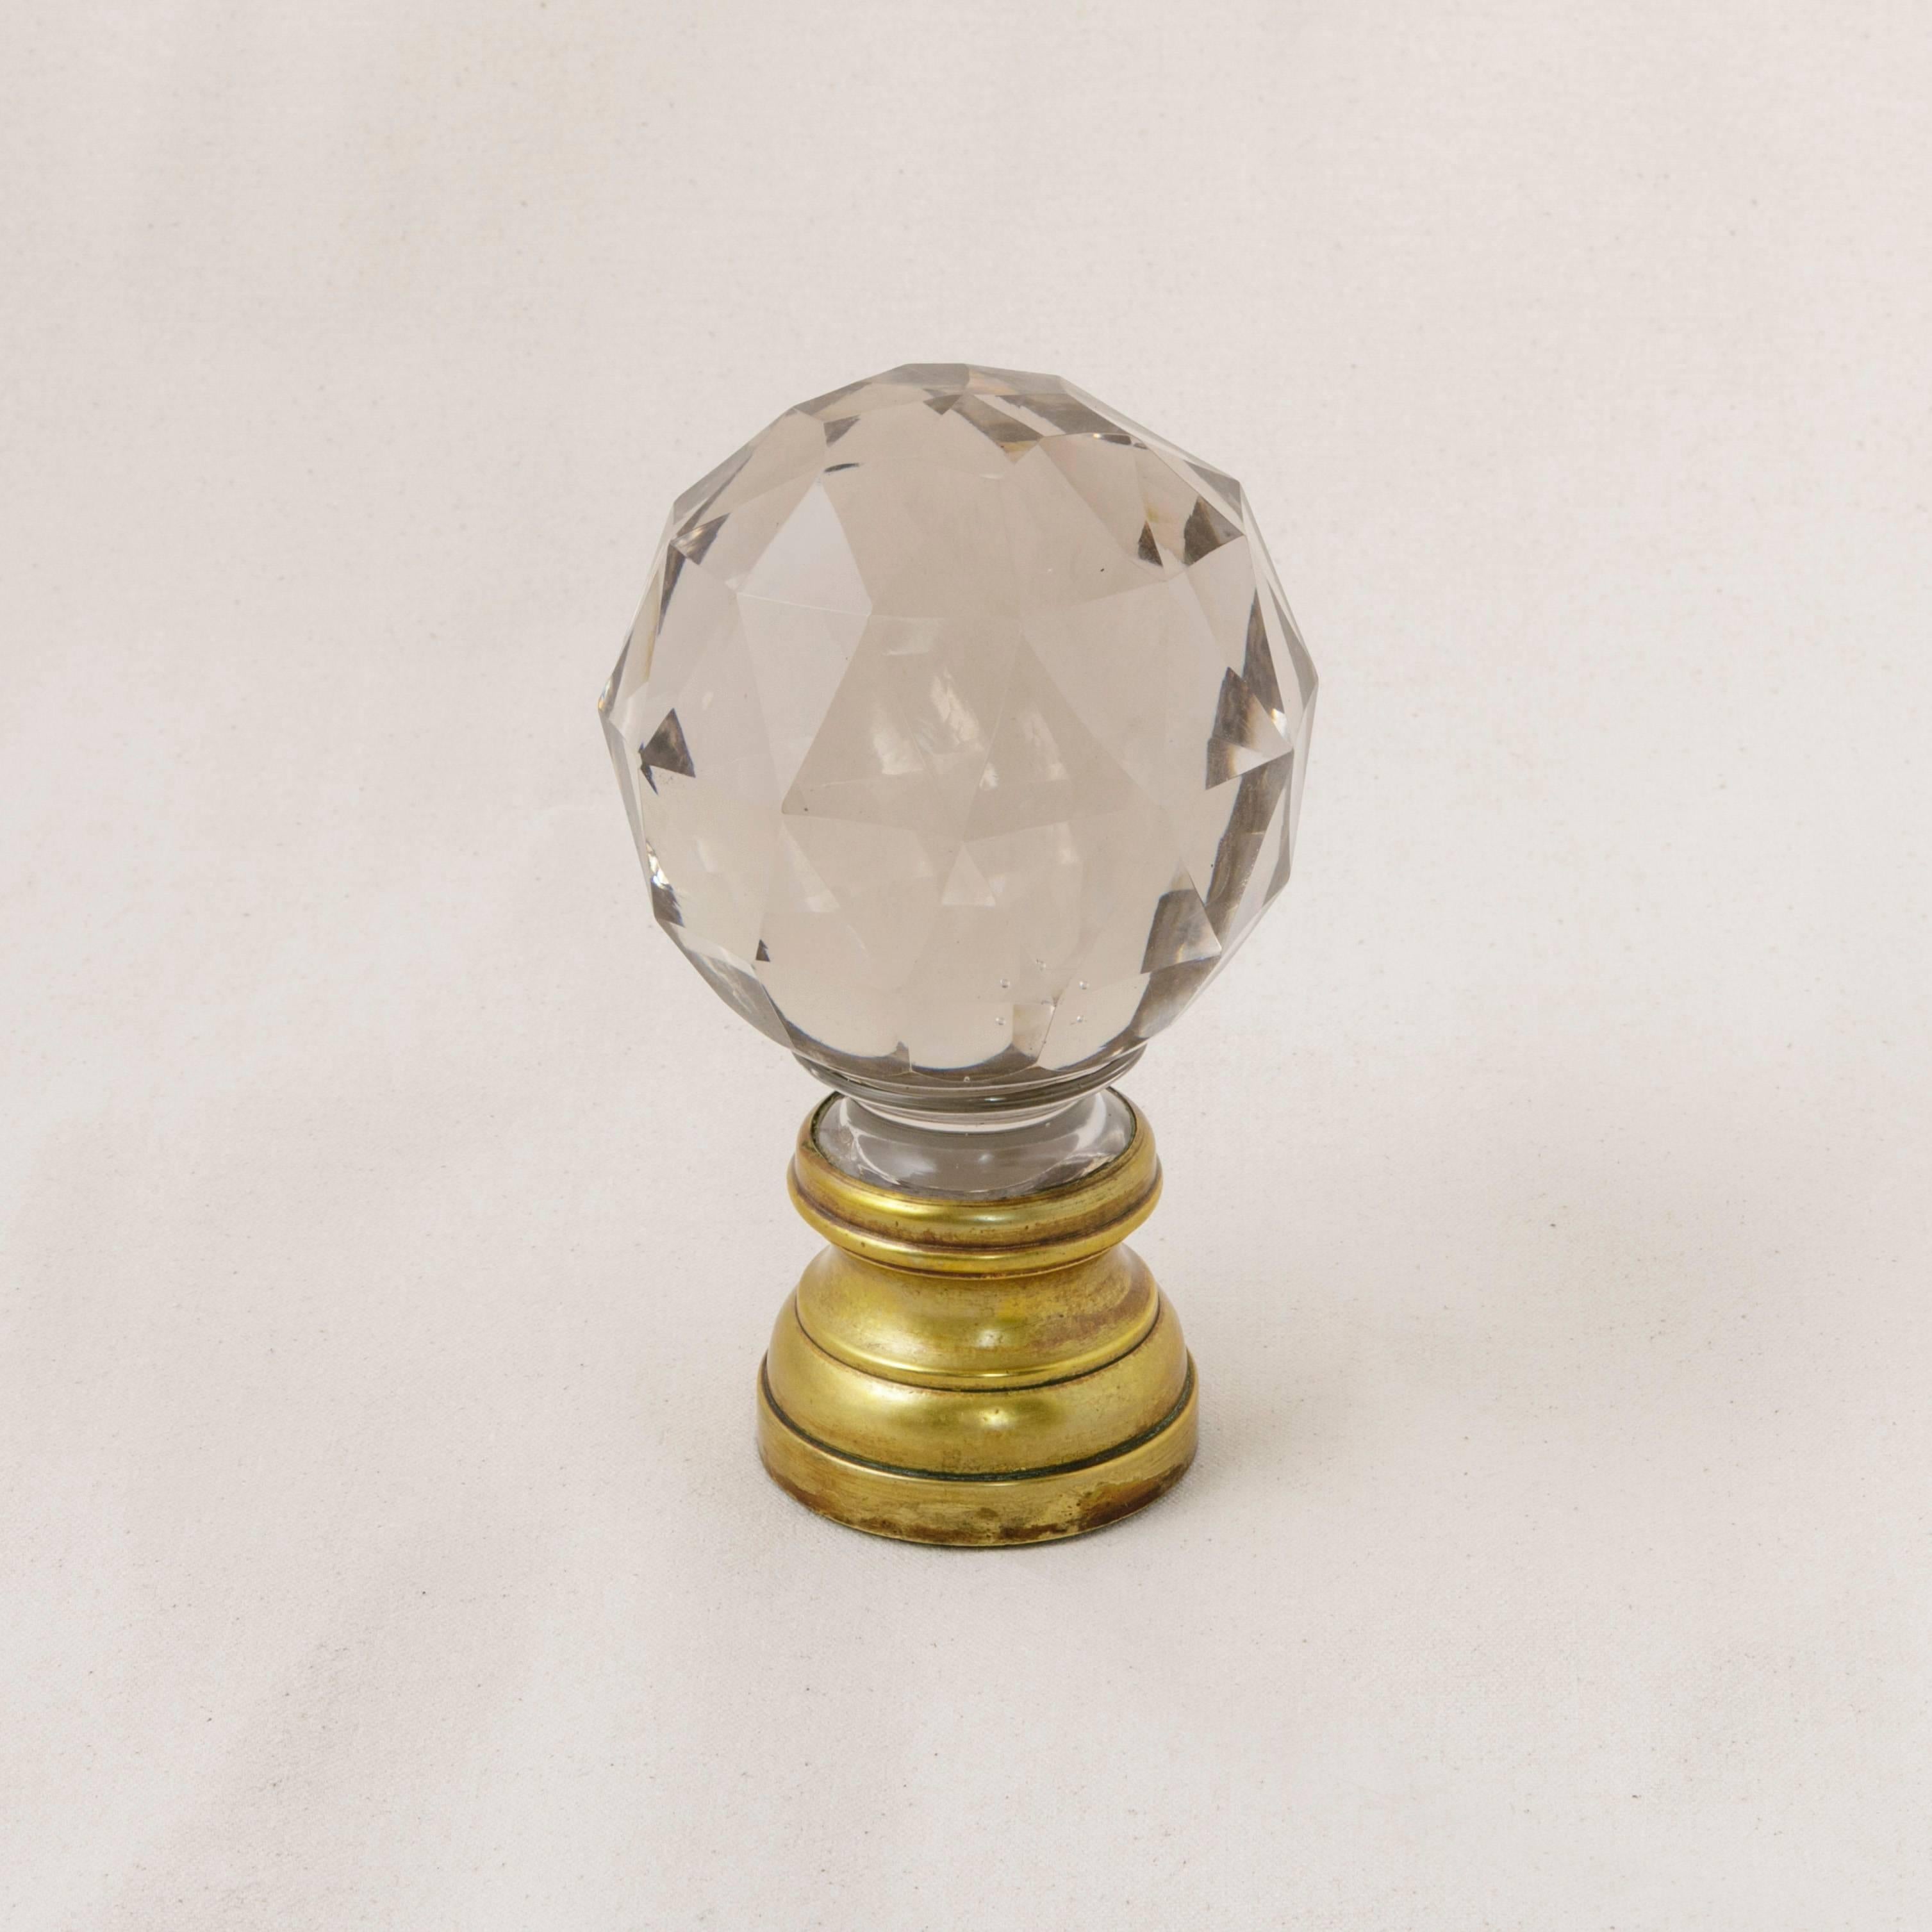 This gorgeous heavy crystal ball was made by Baccarat in France over 100 years ago. This beautifully faceted piece of crystal is mounted on a simple bronze base which is threaded to screw onto a staircase banister for secure attachment. A fantastic